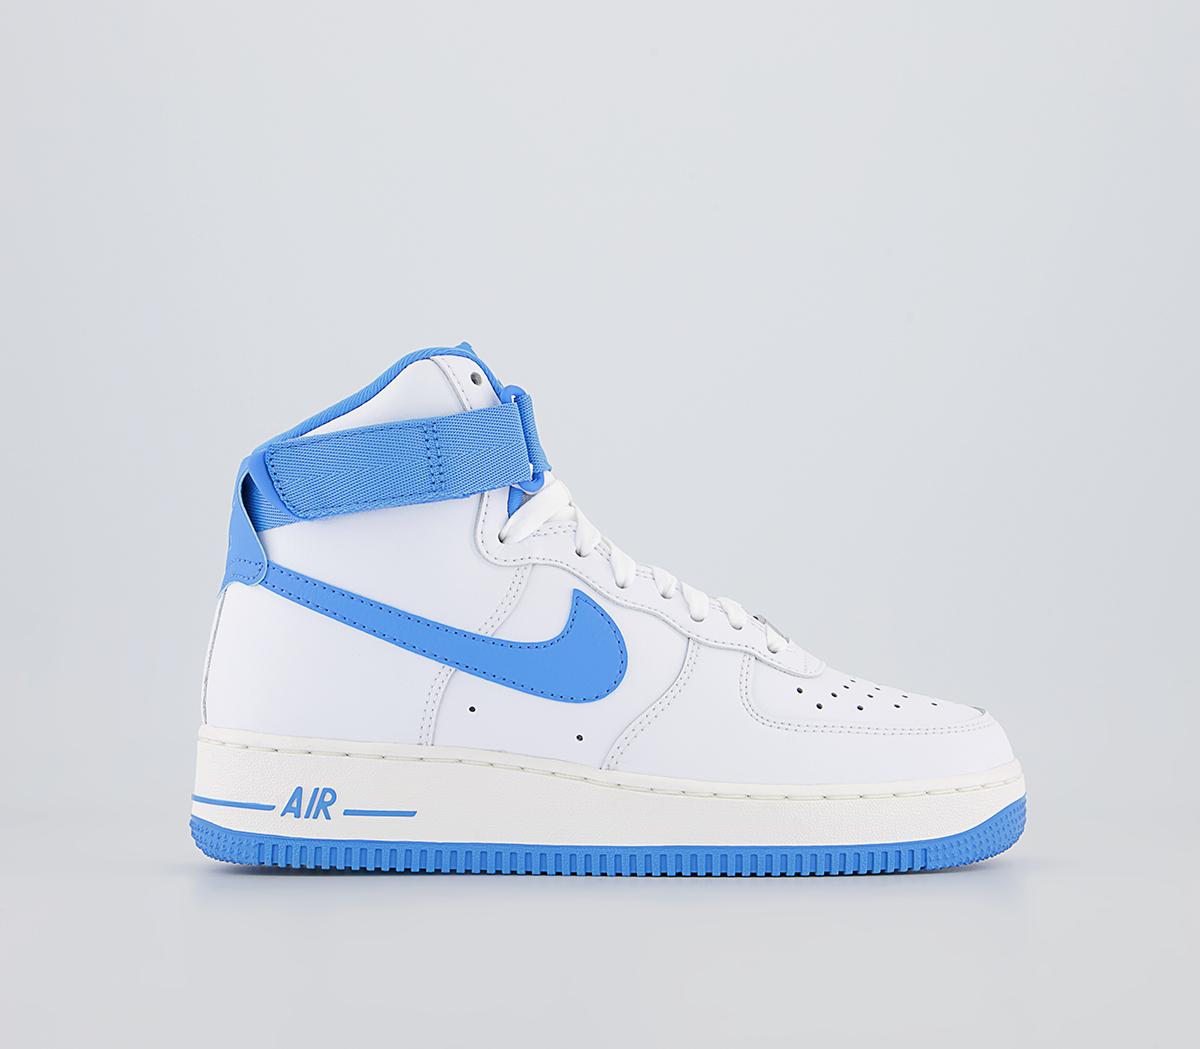 Nike Air Force 1 High Trainers White University Blue Sail - Men's Trainers